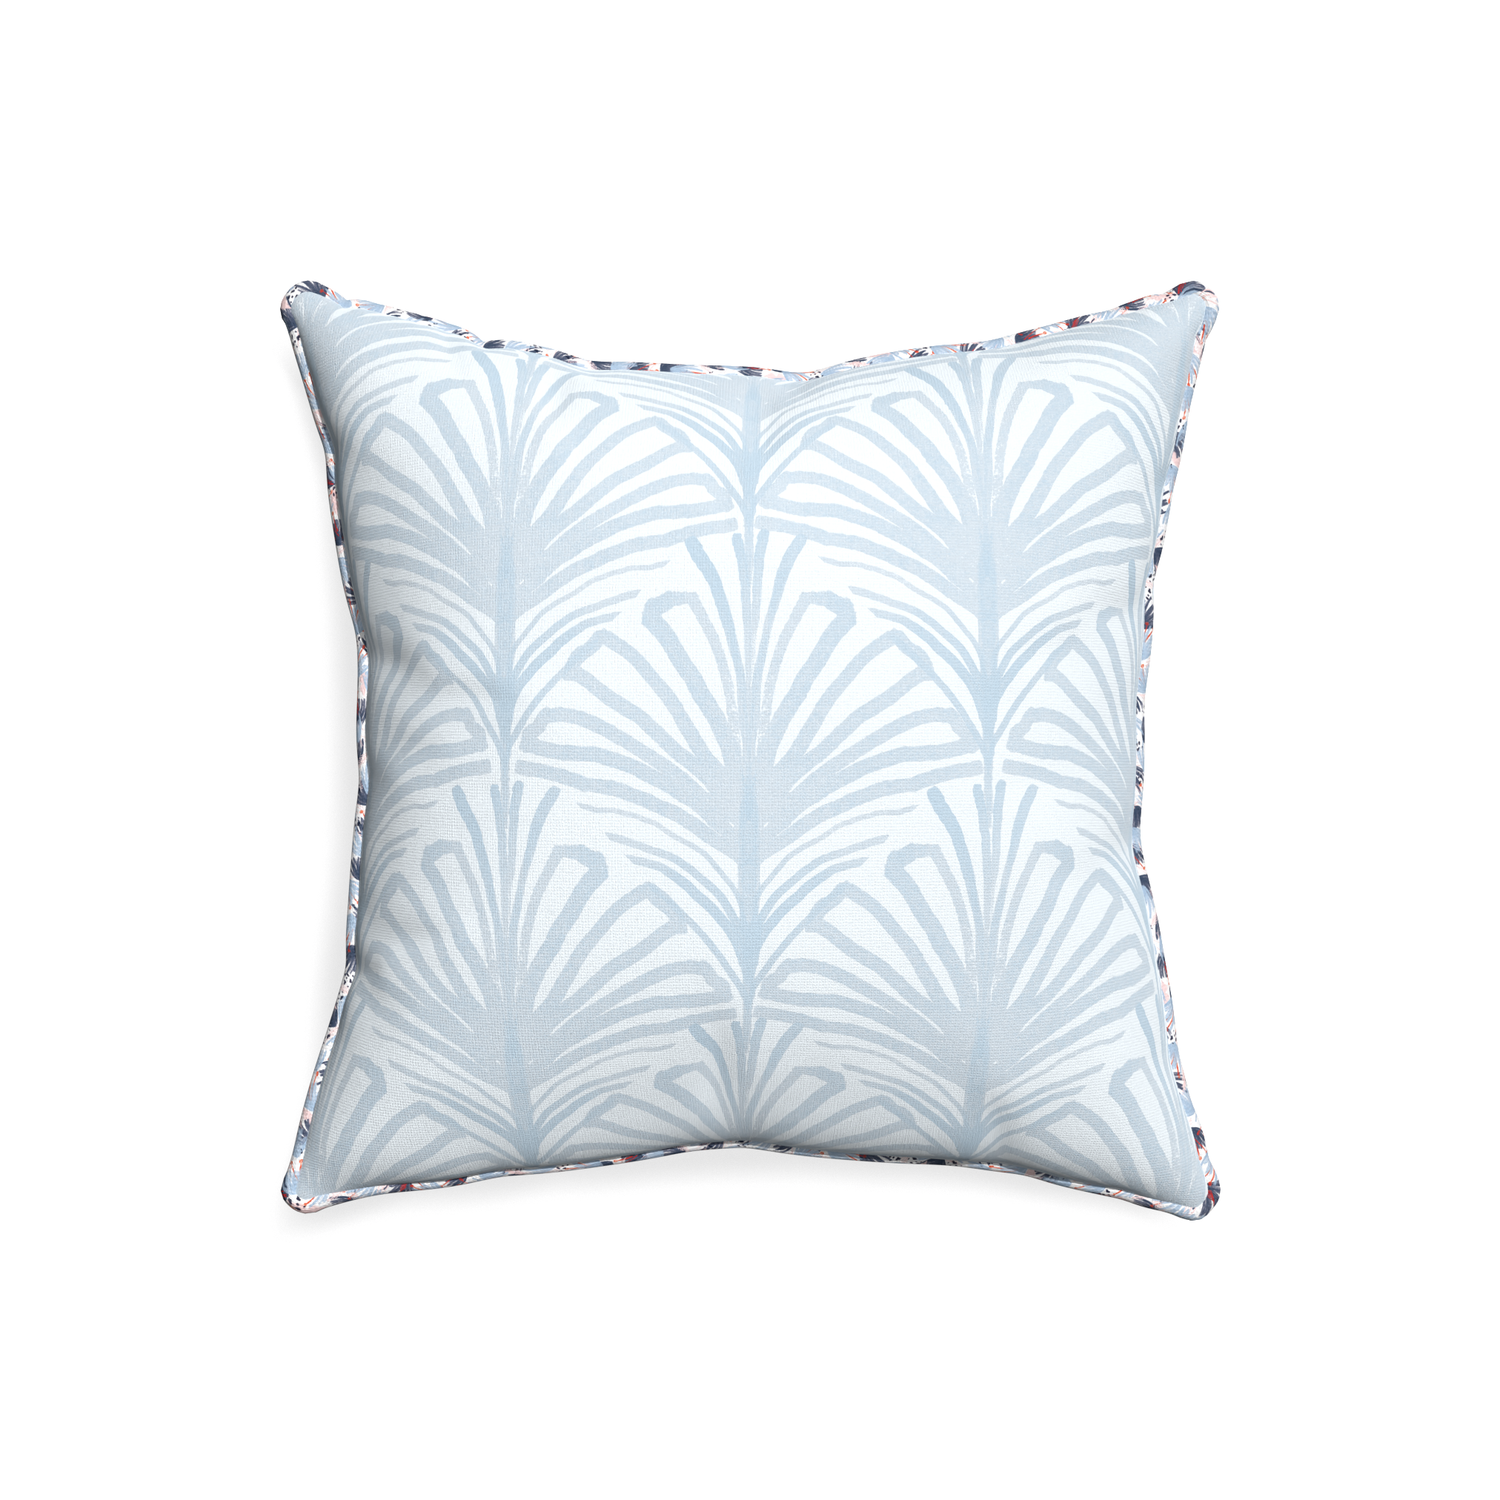 20-square suzy sky custom pillow with e piping on white background